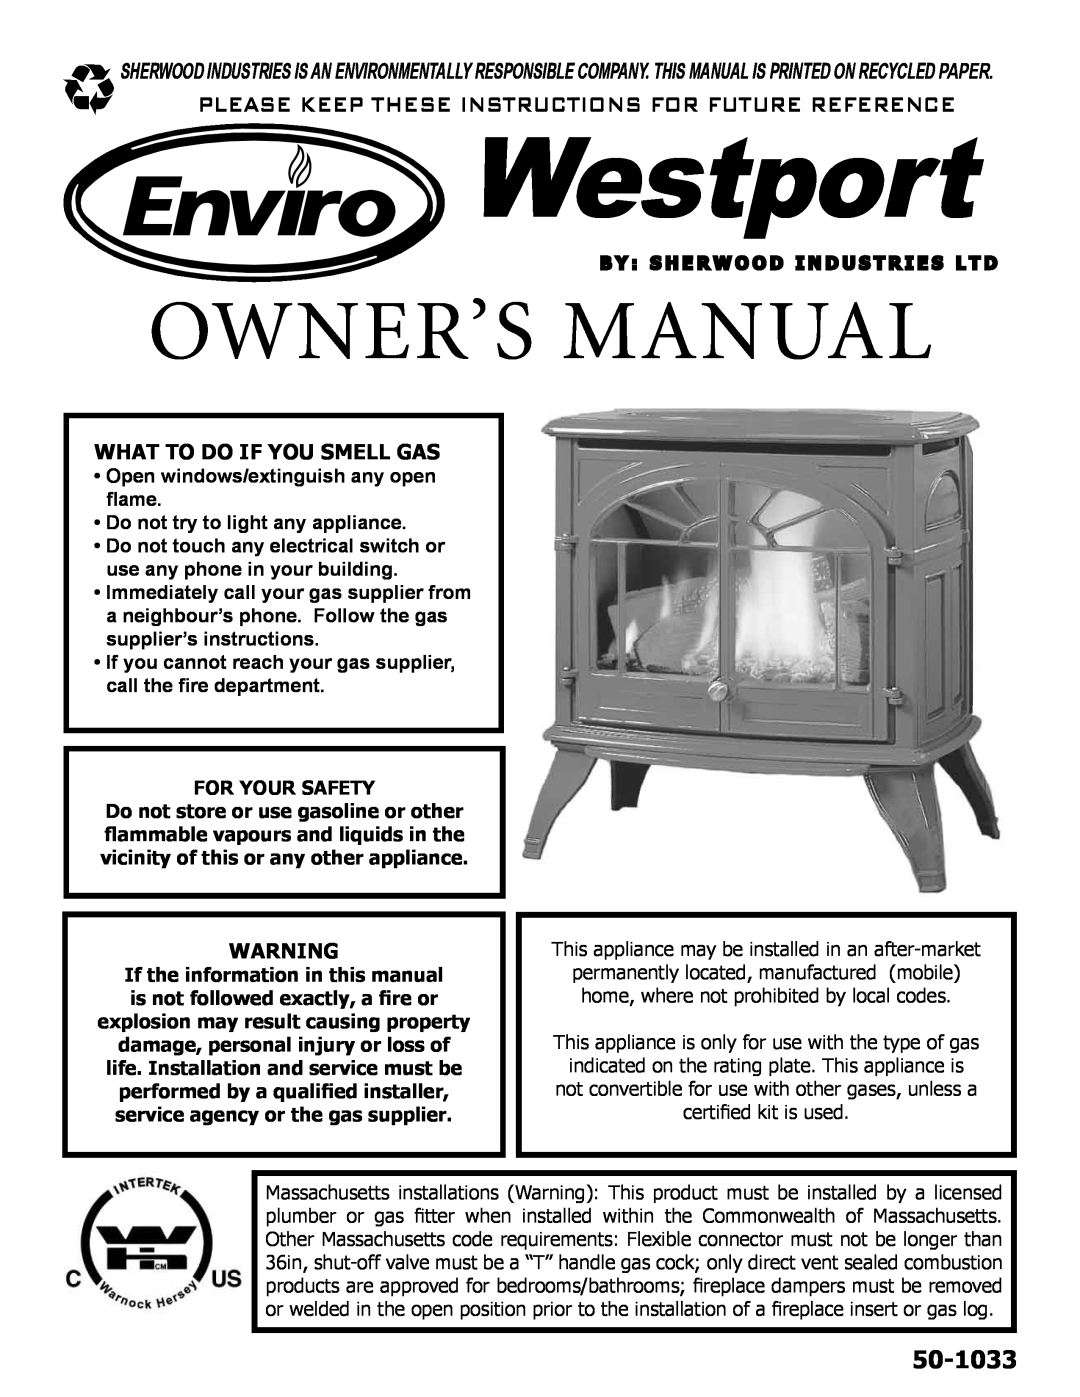 Enviro C-10794 owner manual What To Do If You Smell Gas, For Your Safety, Westport, 50-1033 